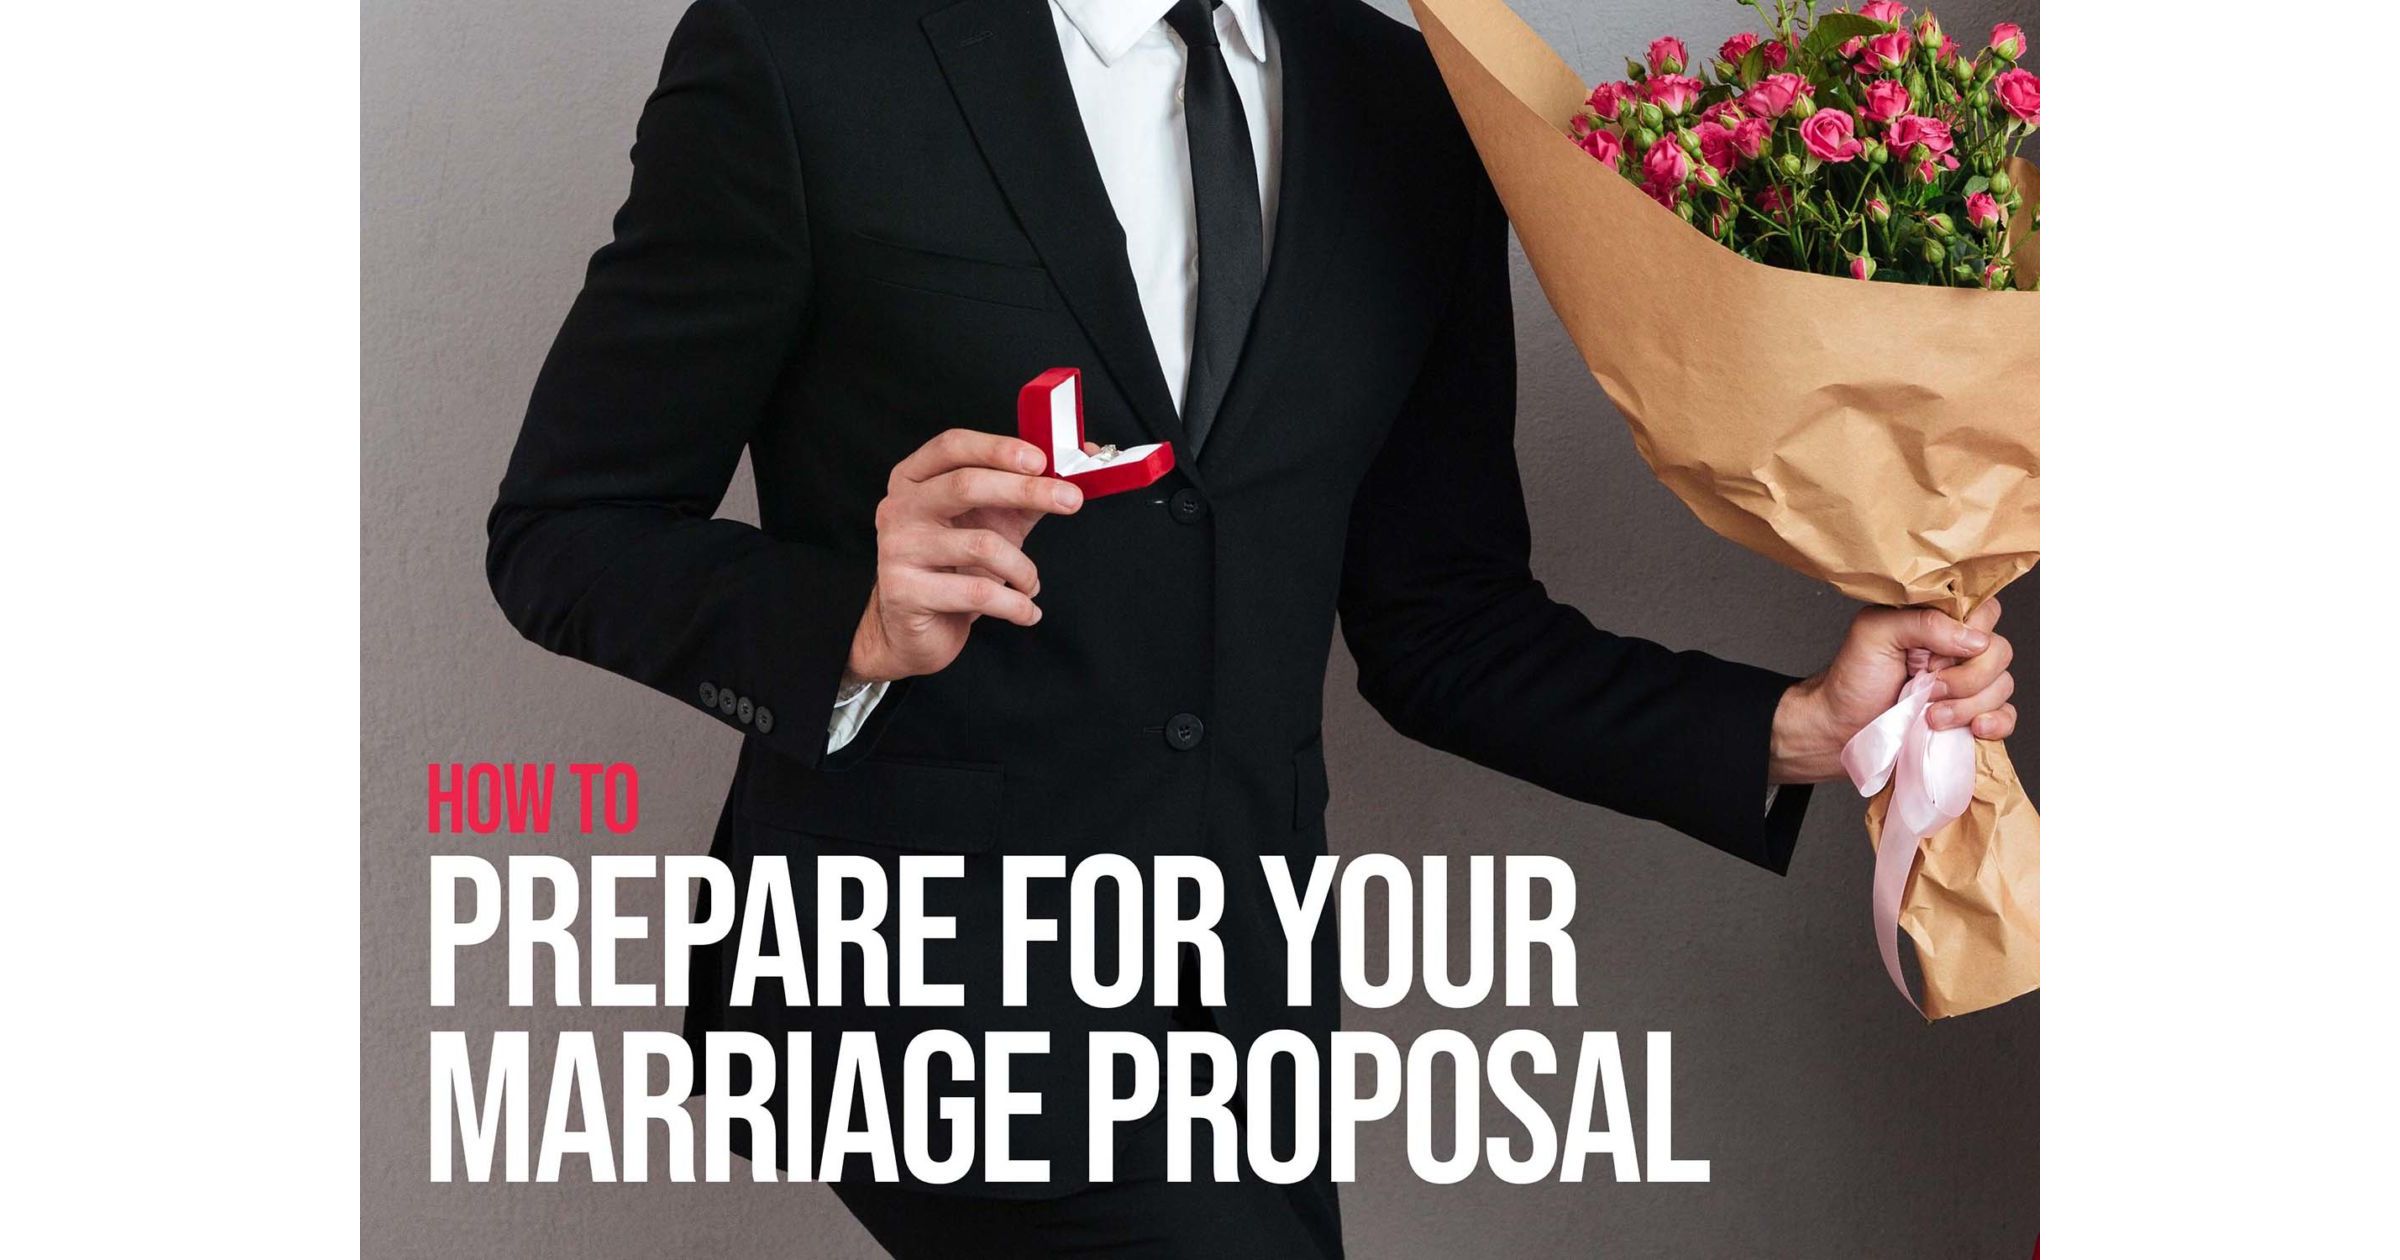 How to Prepare for Your Marriage Proposal